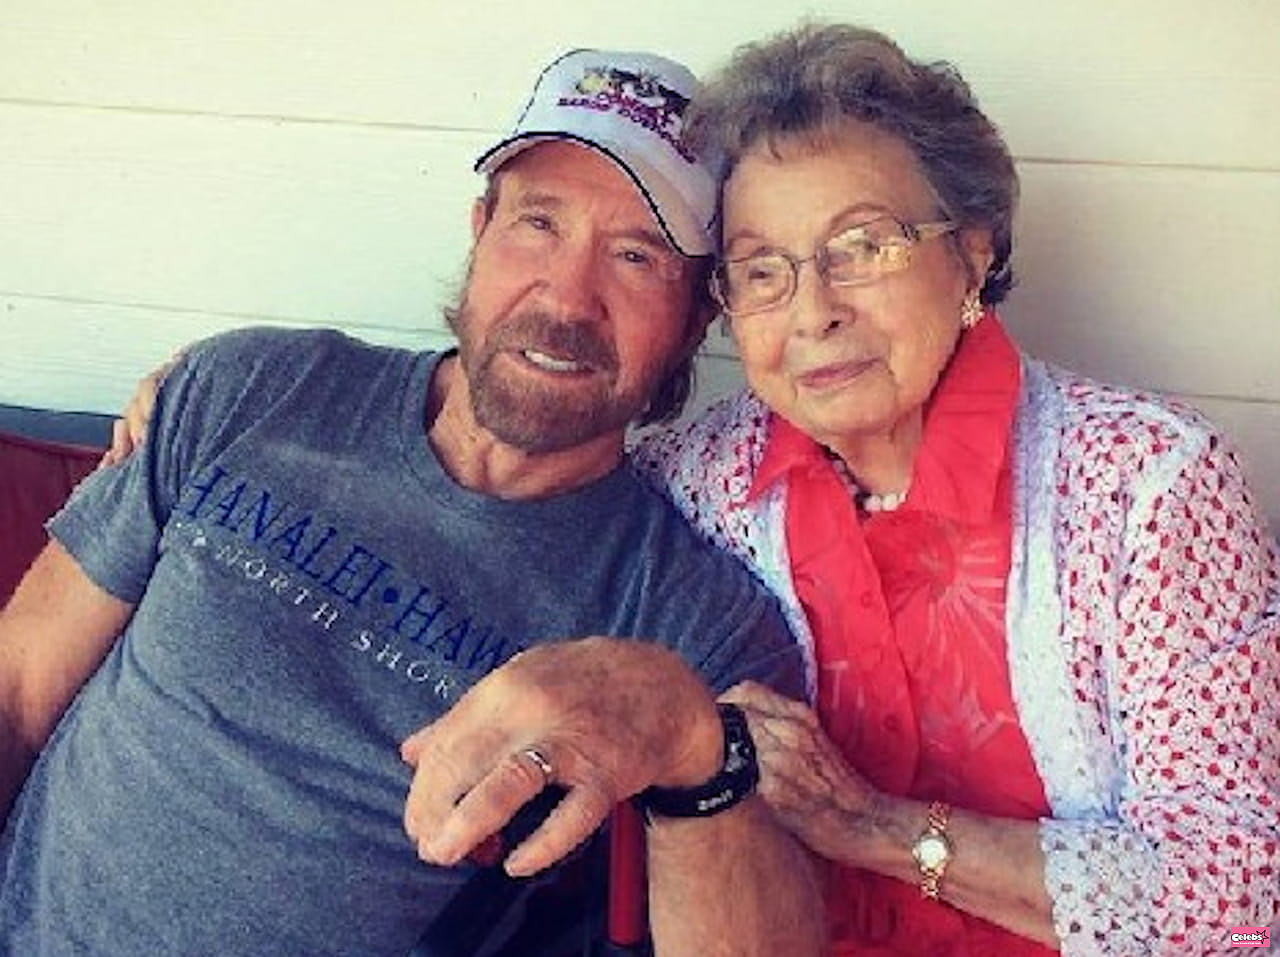 At 83, Chuck Norris wishes his mom a happy Mother's Day again with an adorable message